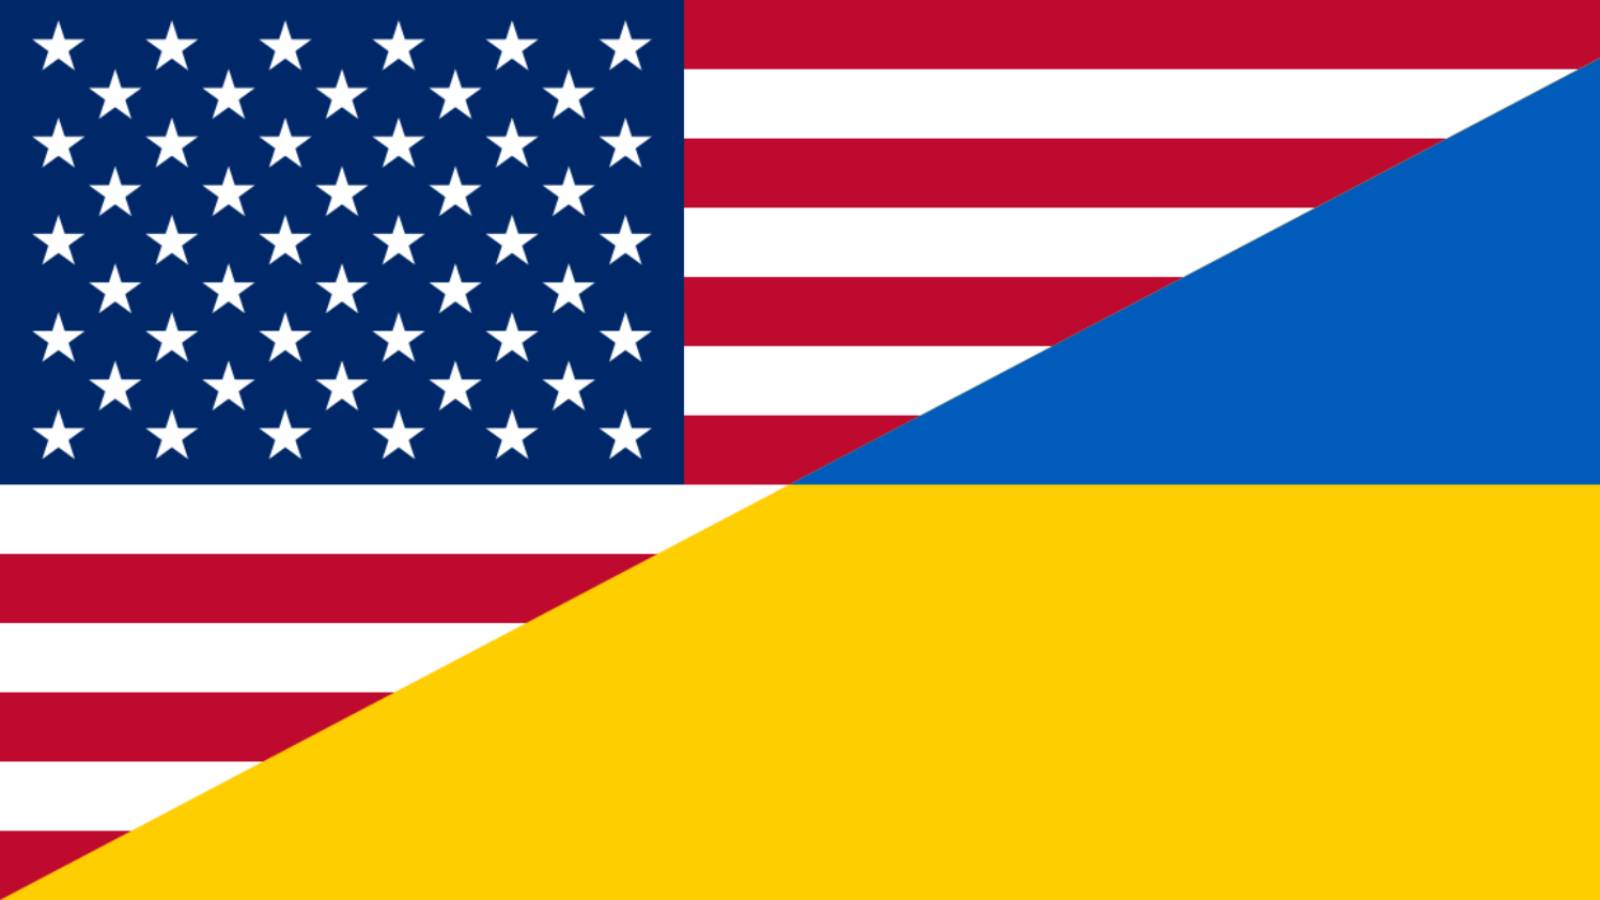 The USA Announces an Important Military Aid Package for Ukraine